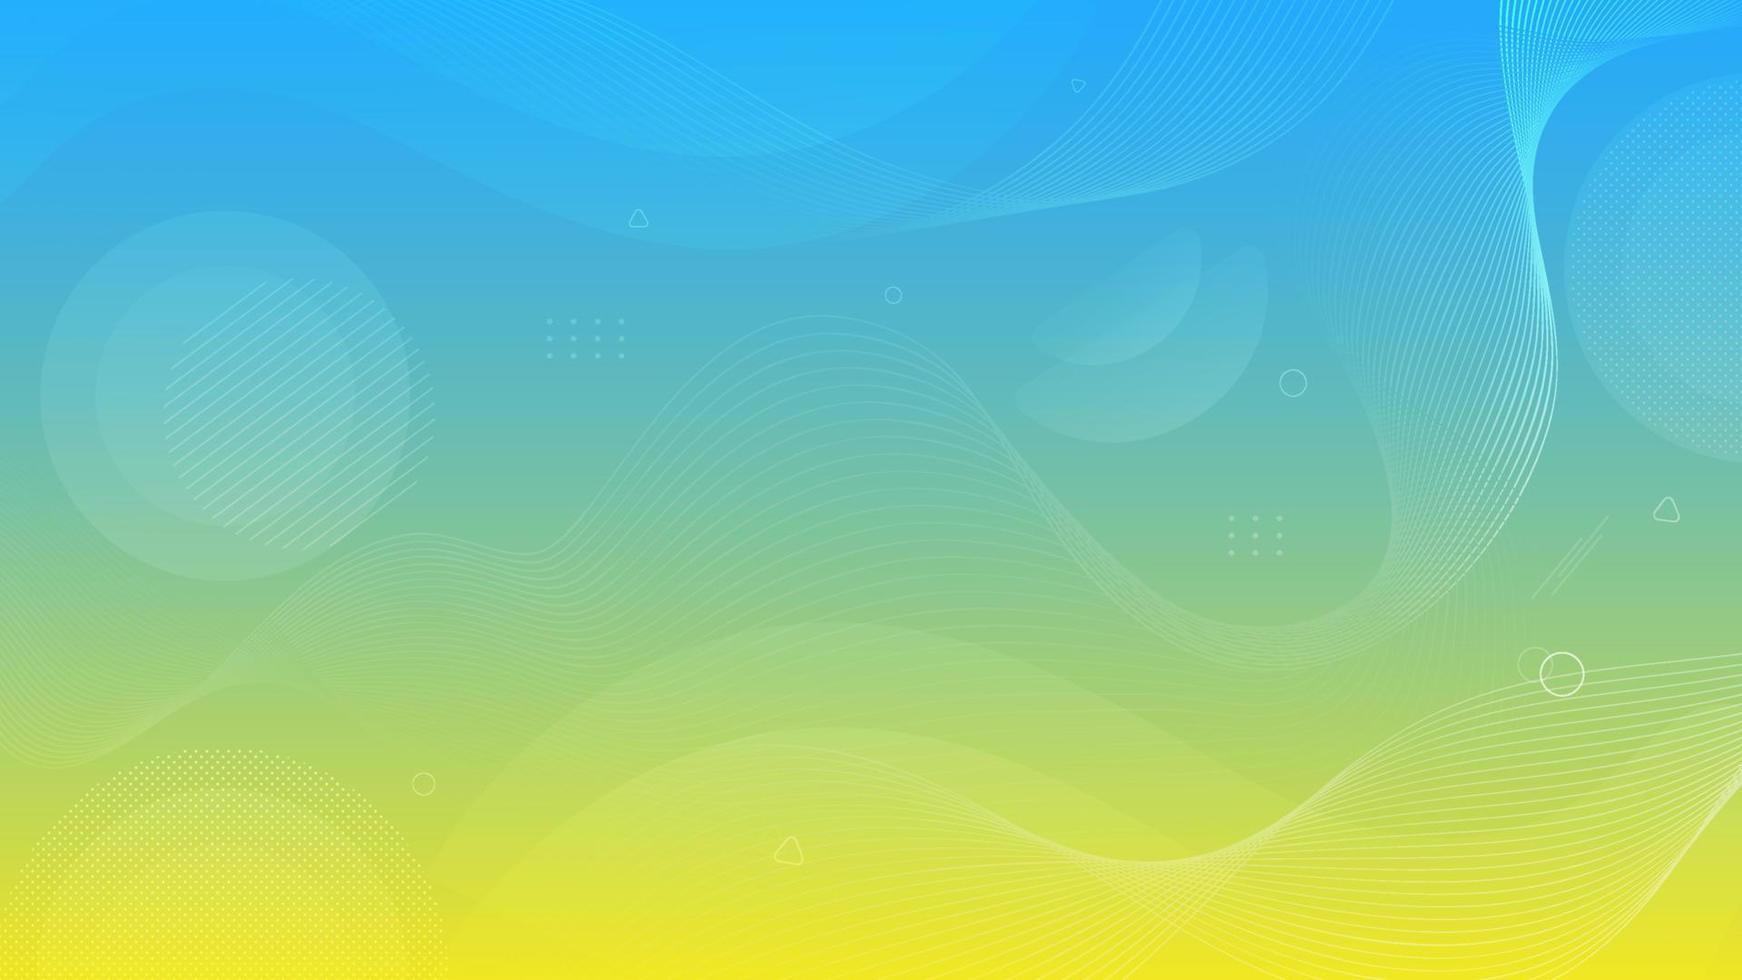 Abstract vector background with translucent geometric shapes and lines. Blue and yellow colors Ukrainian colors. Illustration with trending gradients for banners, landing pages, web design.